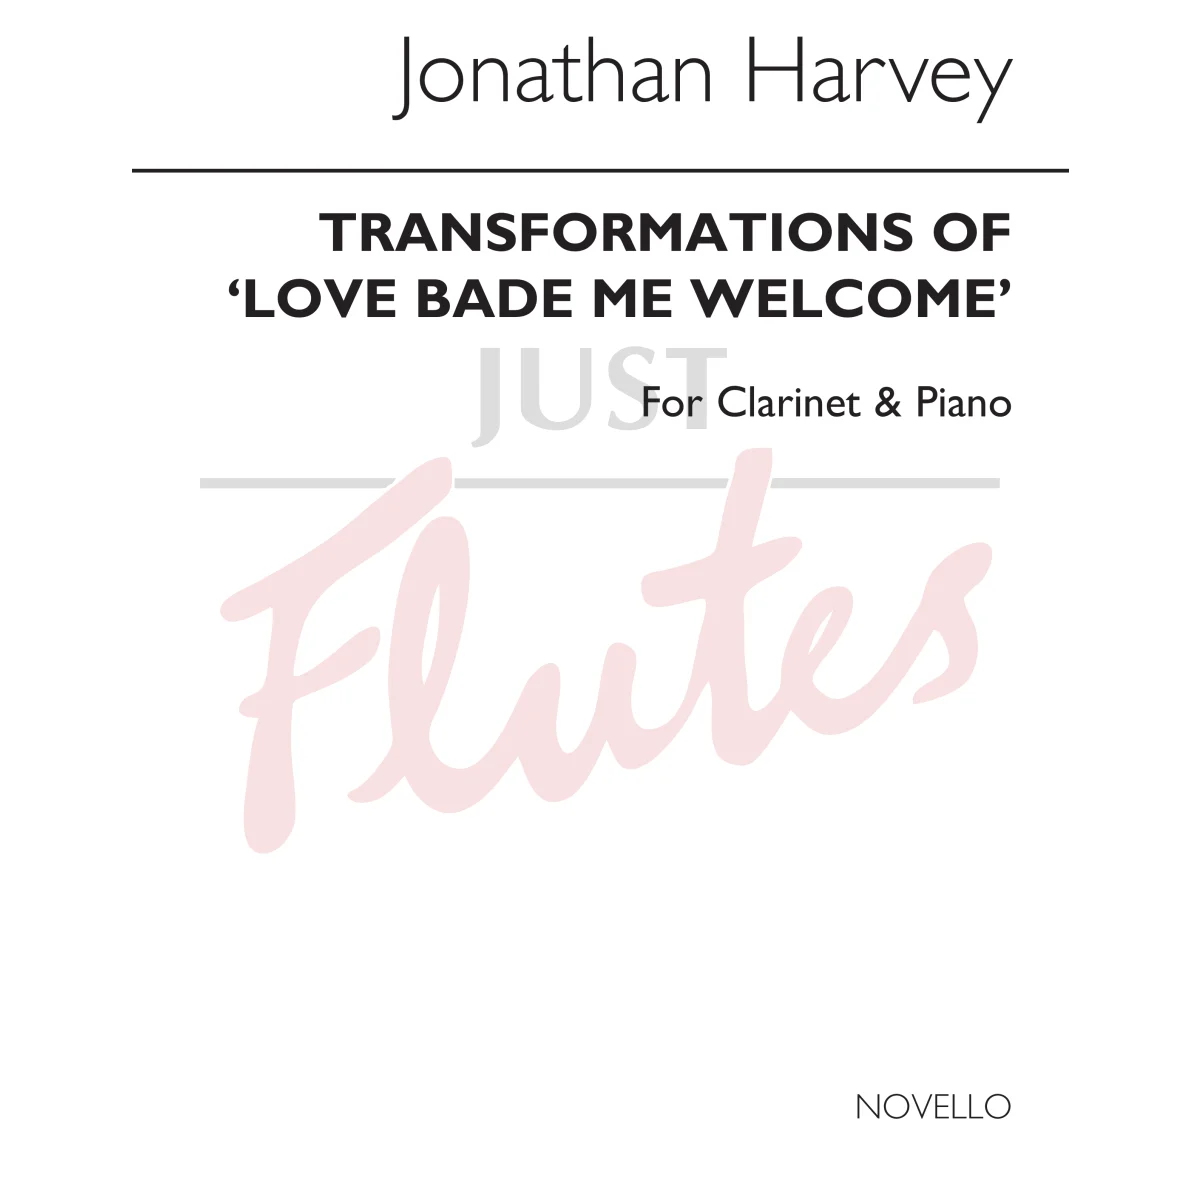 Transformations of Love Bade Me Welcome for Clarinet